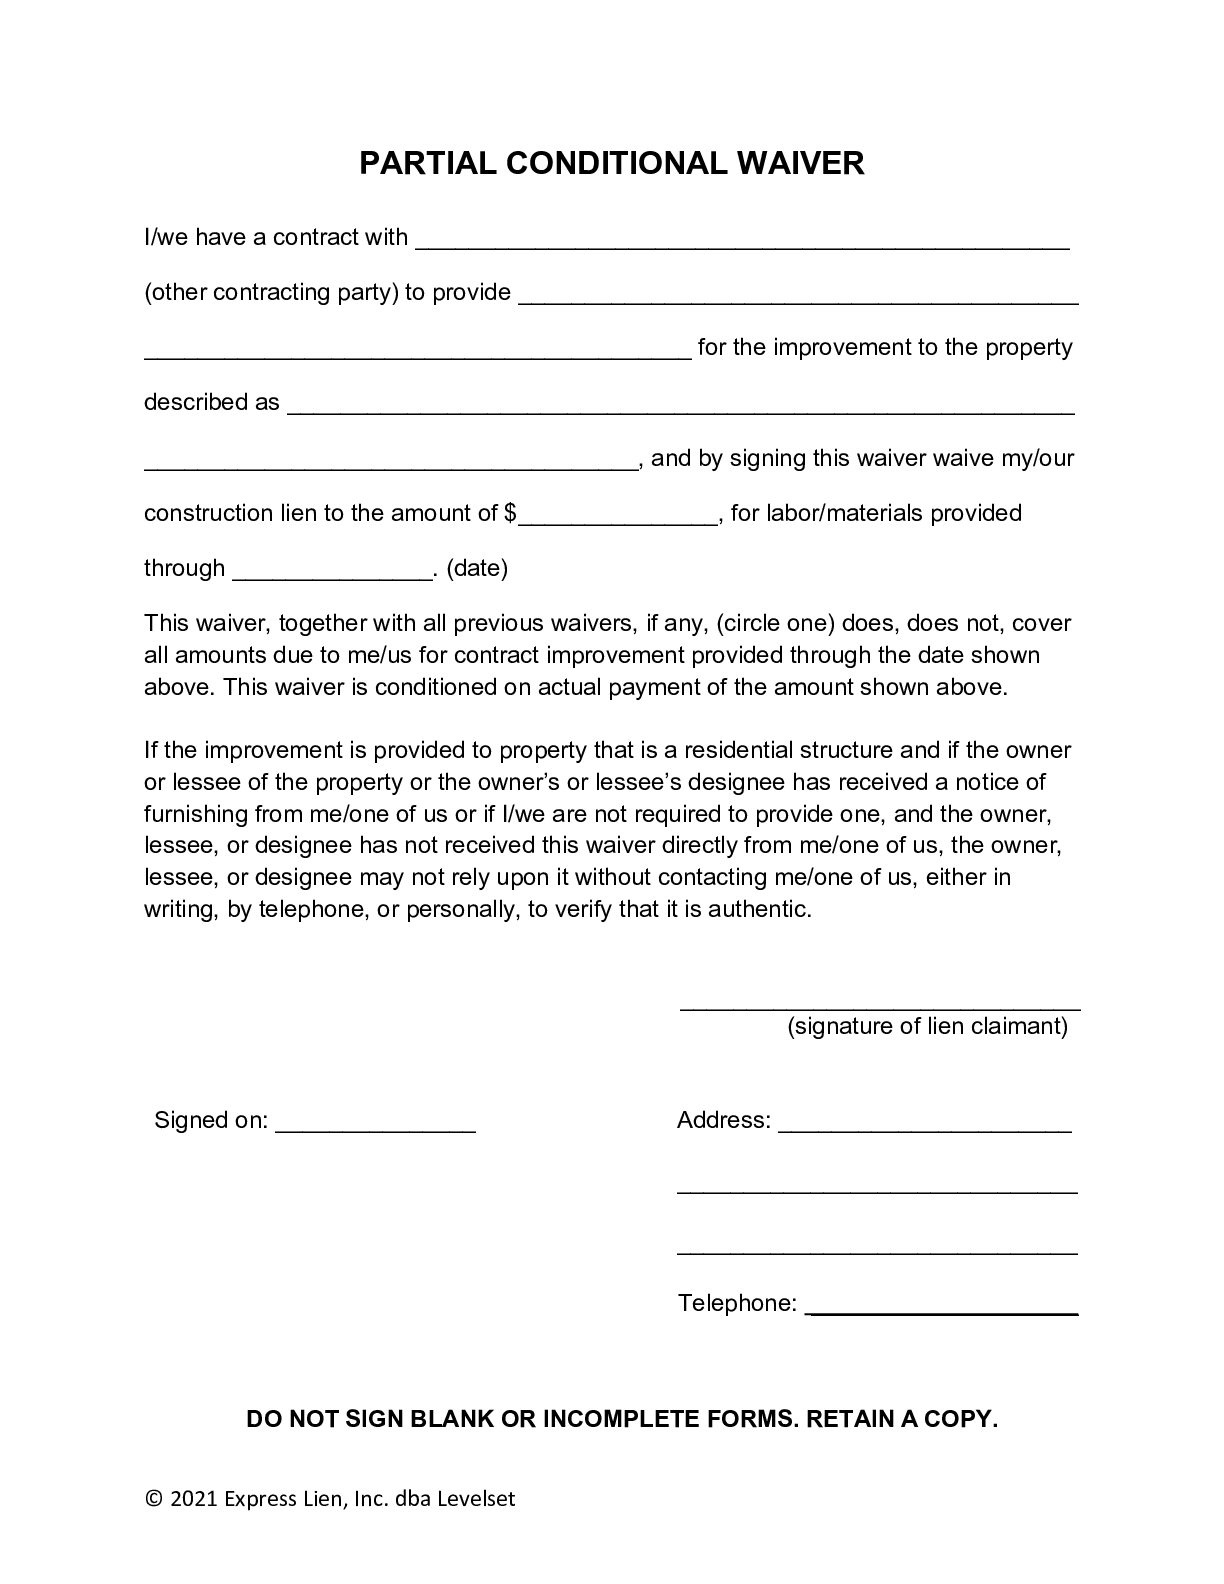 Michigan Partial Conditional Lien Waiver Form - free from